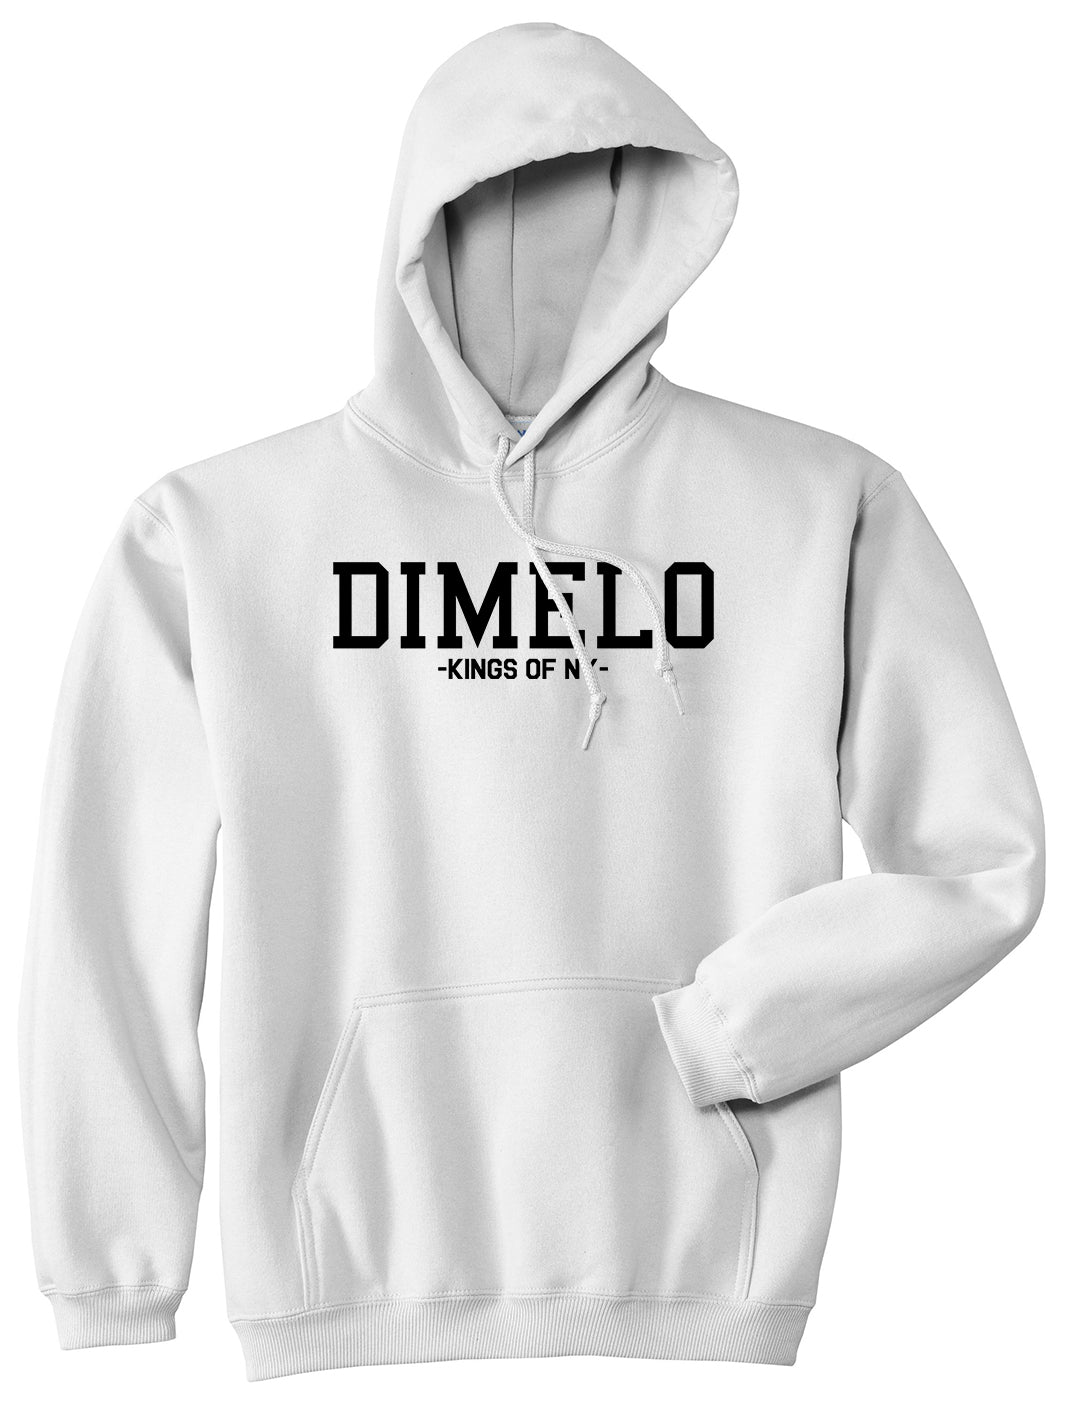 Dimelo Kings Of NY Pullover Hoodie in White